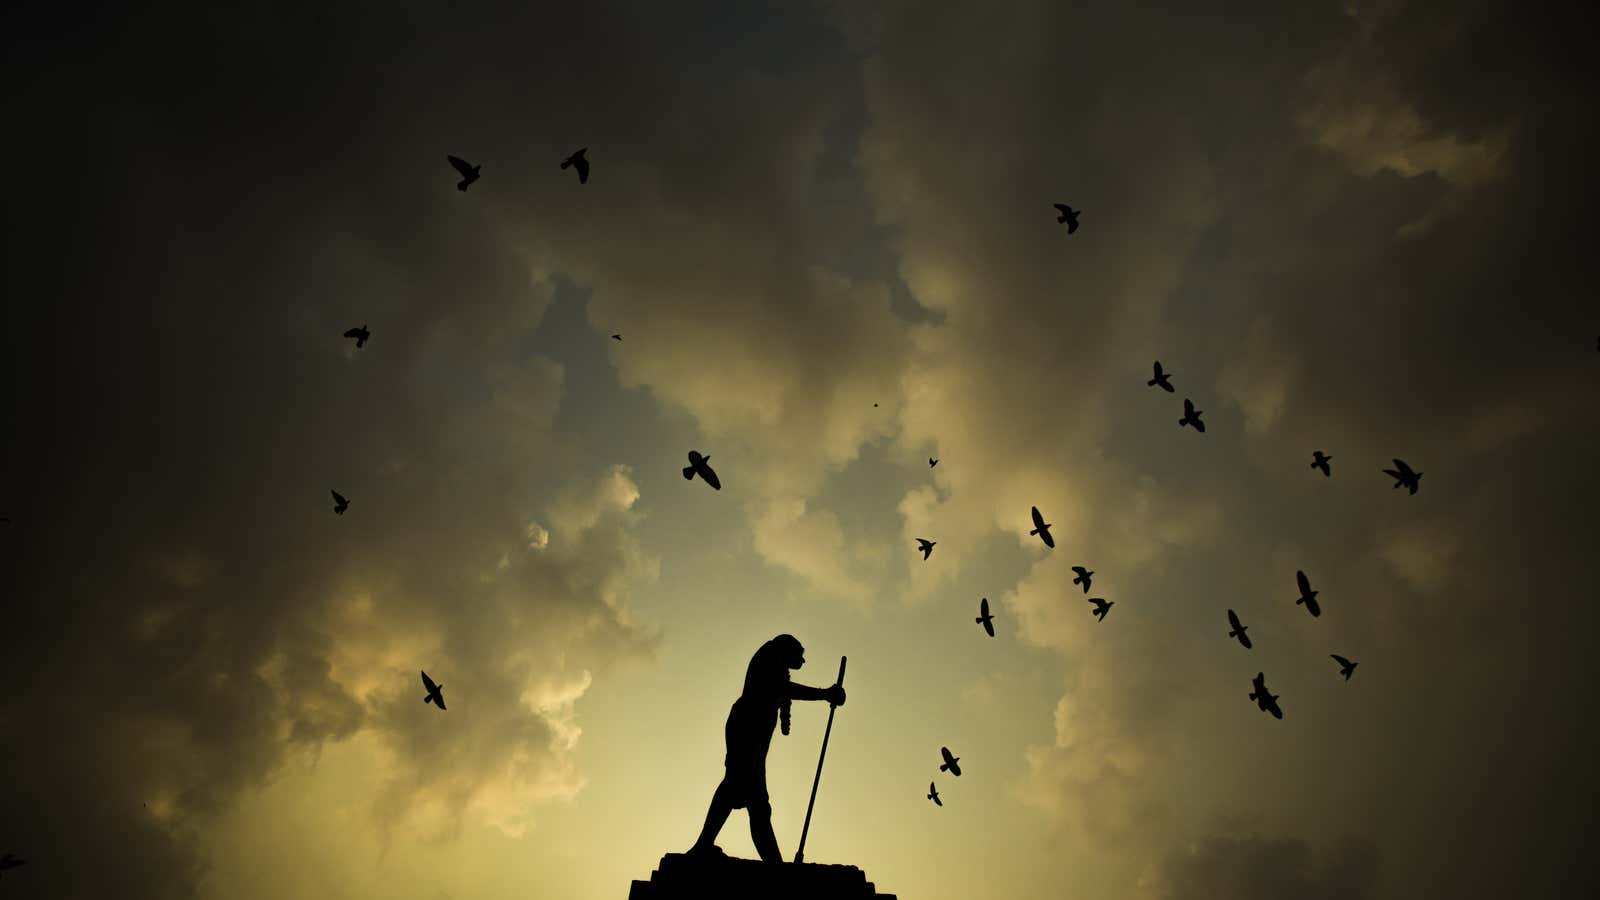 A statue of Mahatma Gandhi is silhouetted against the evening sky in Amritsar, India.